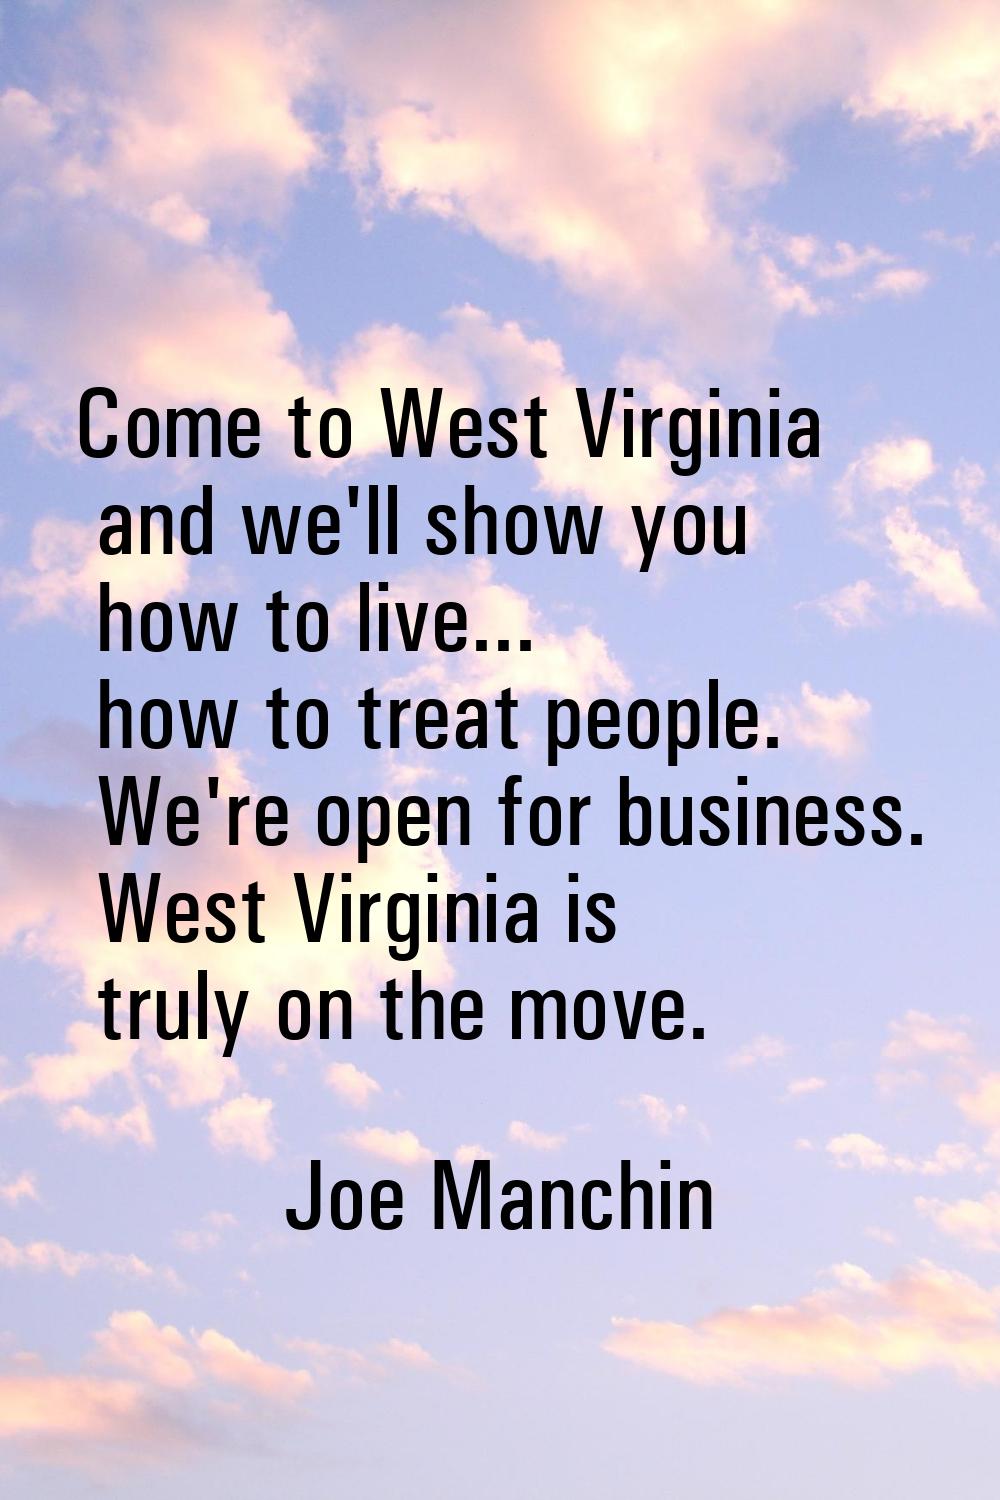 Come to West Virginia and we'll show you how to live... how to treat people. We're open for busines